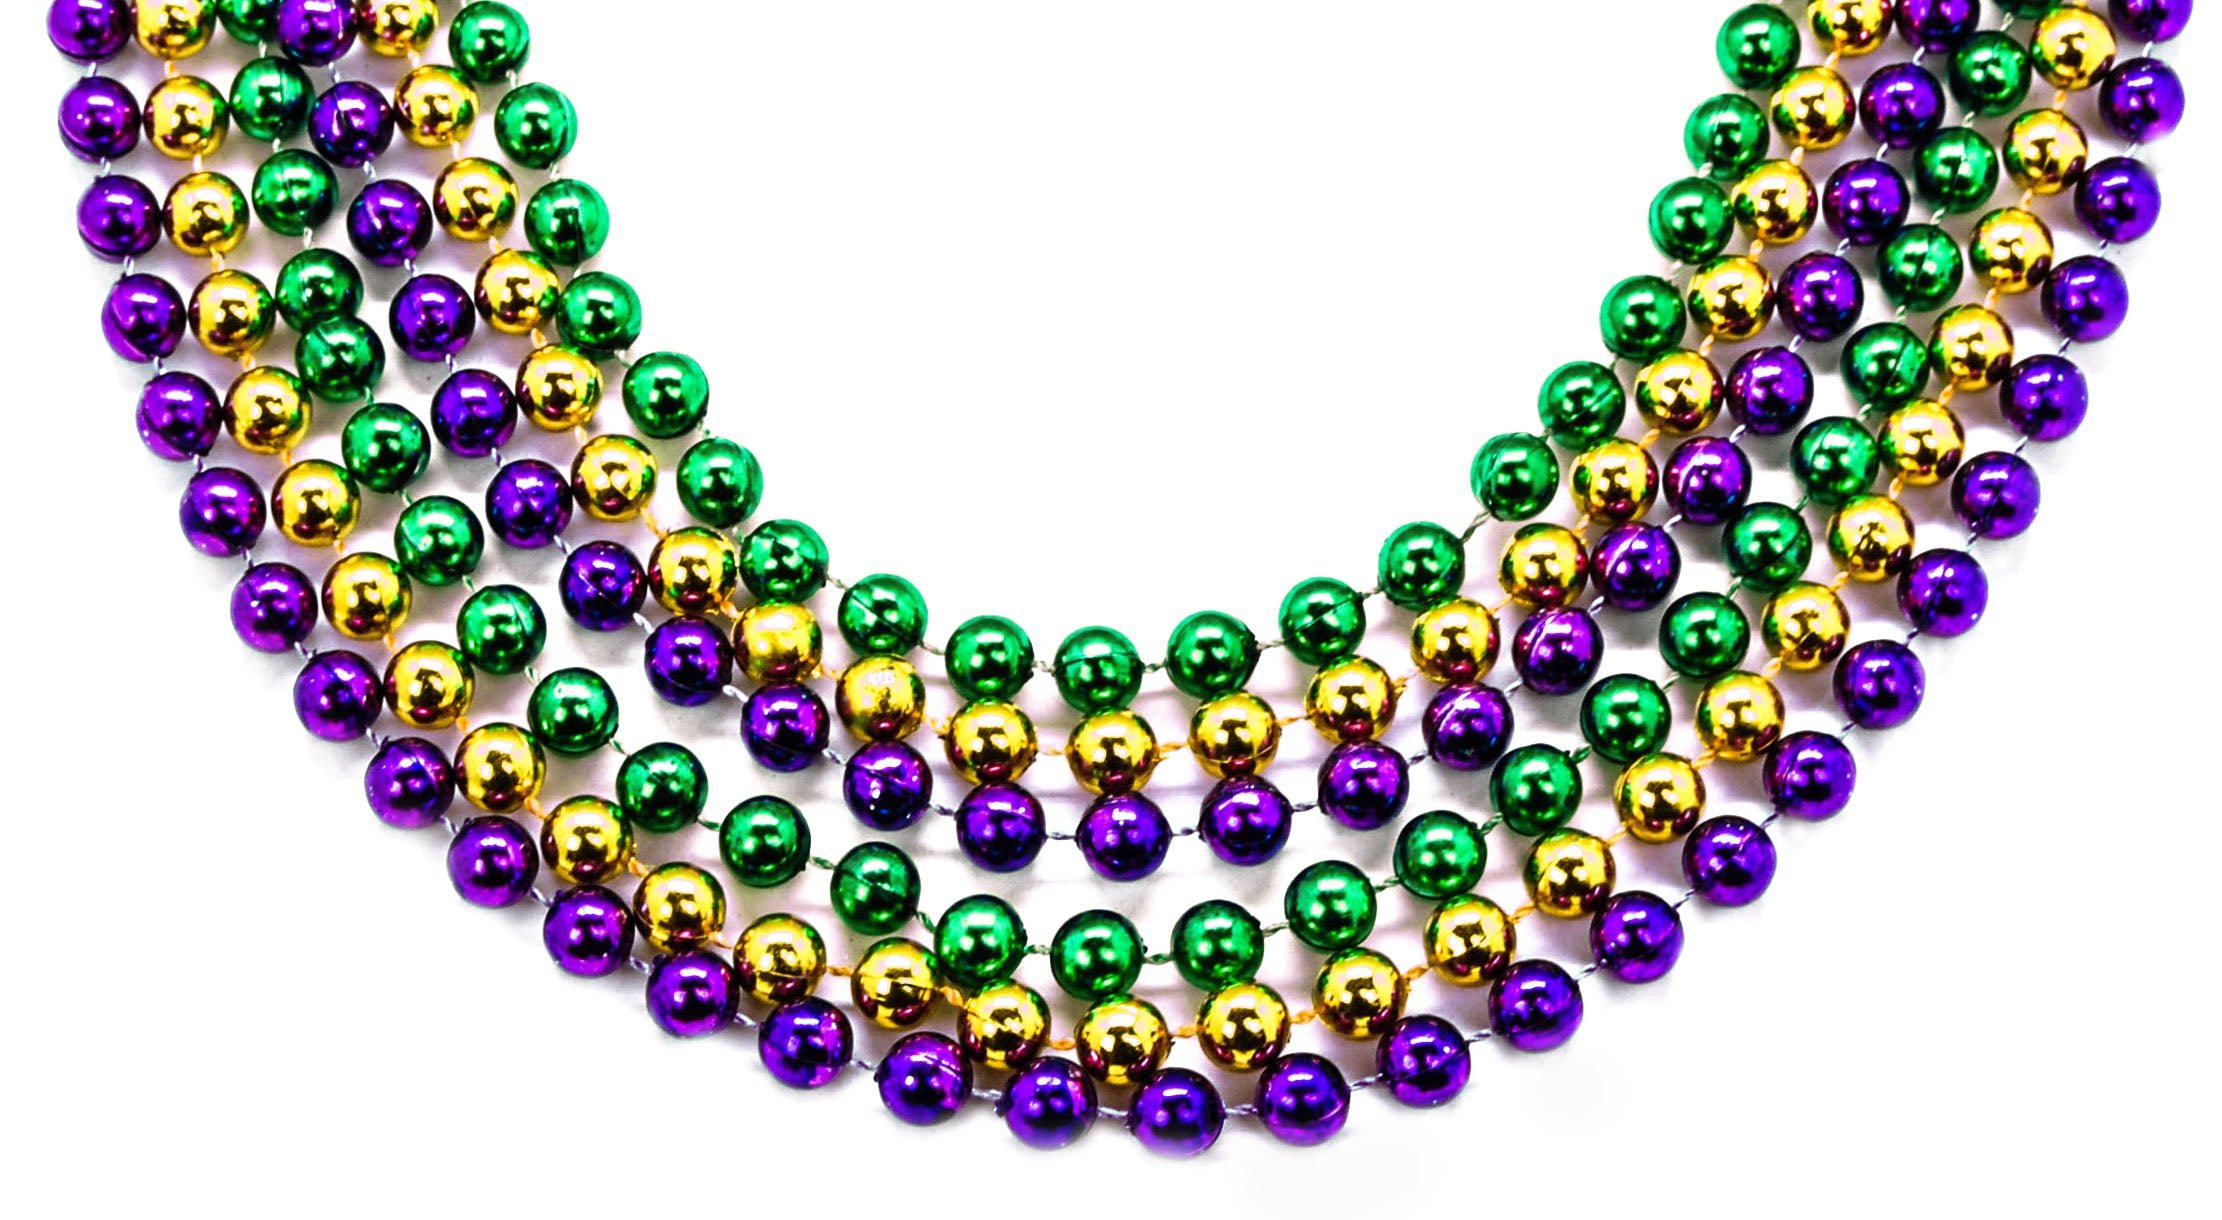 Purple, Green, and Gold Beads